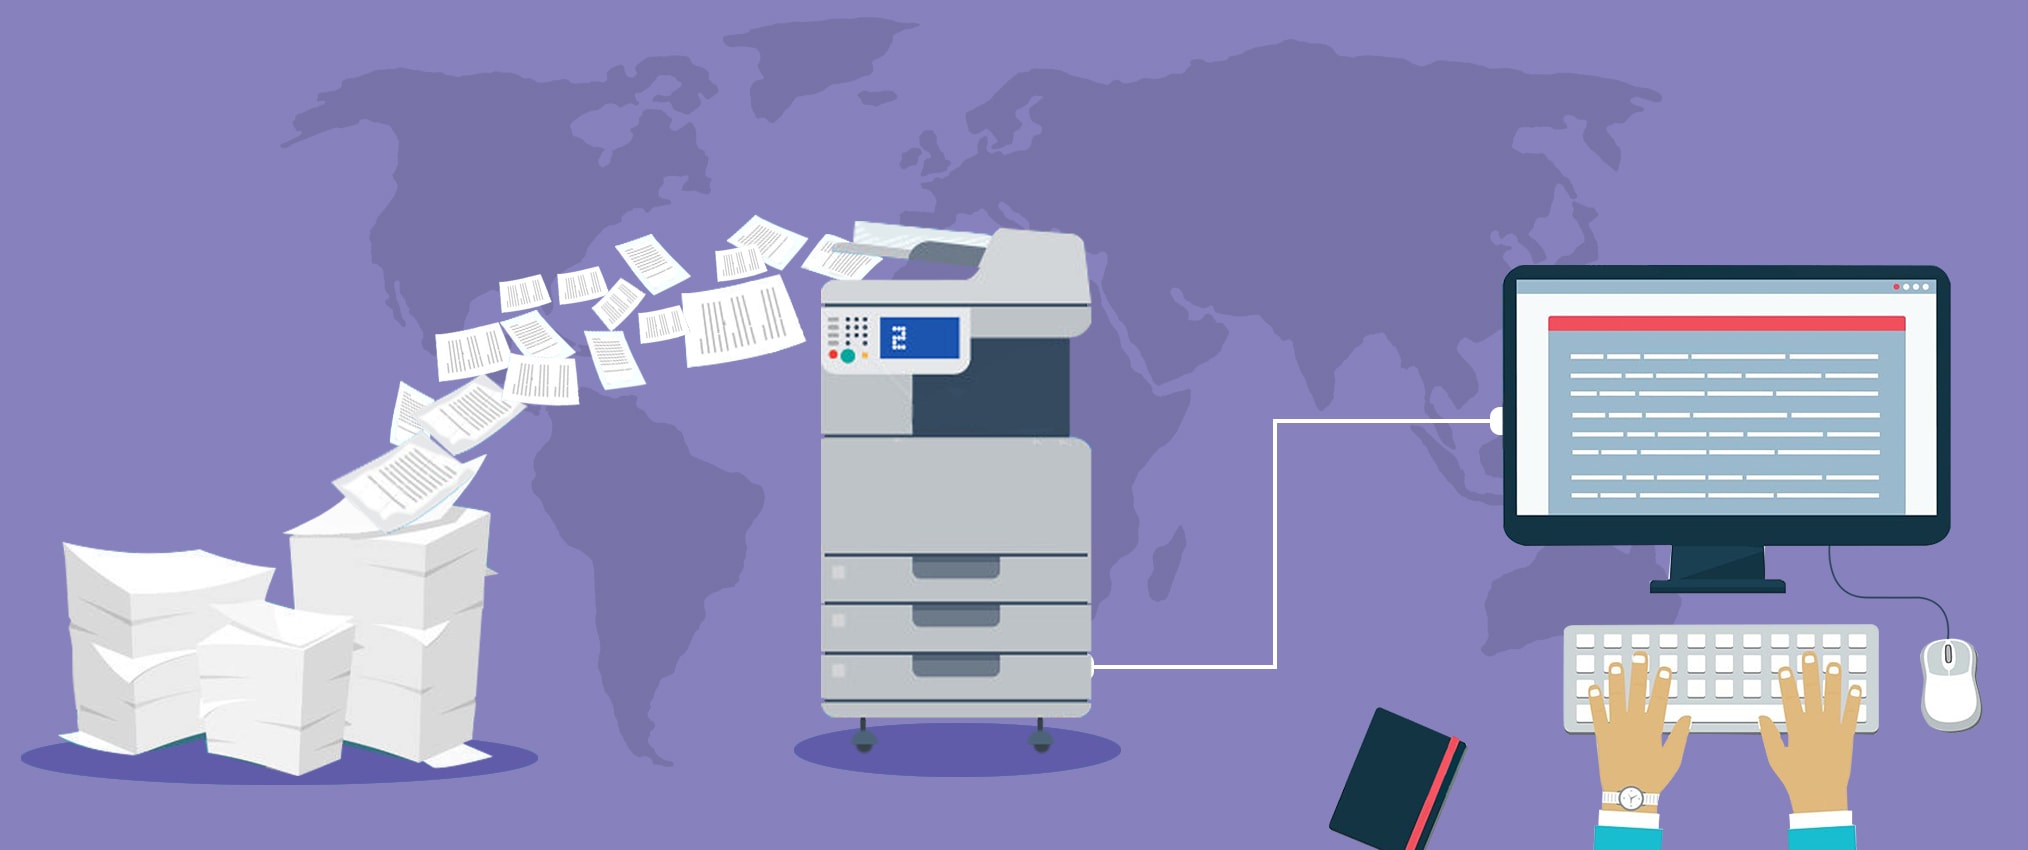 Significance of Document Scanning to a Digitized World for Small Businesses